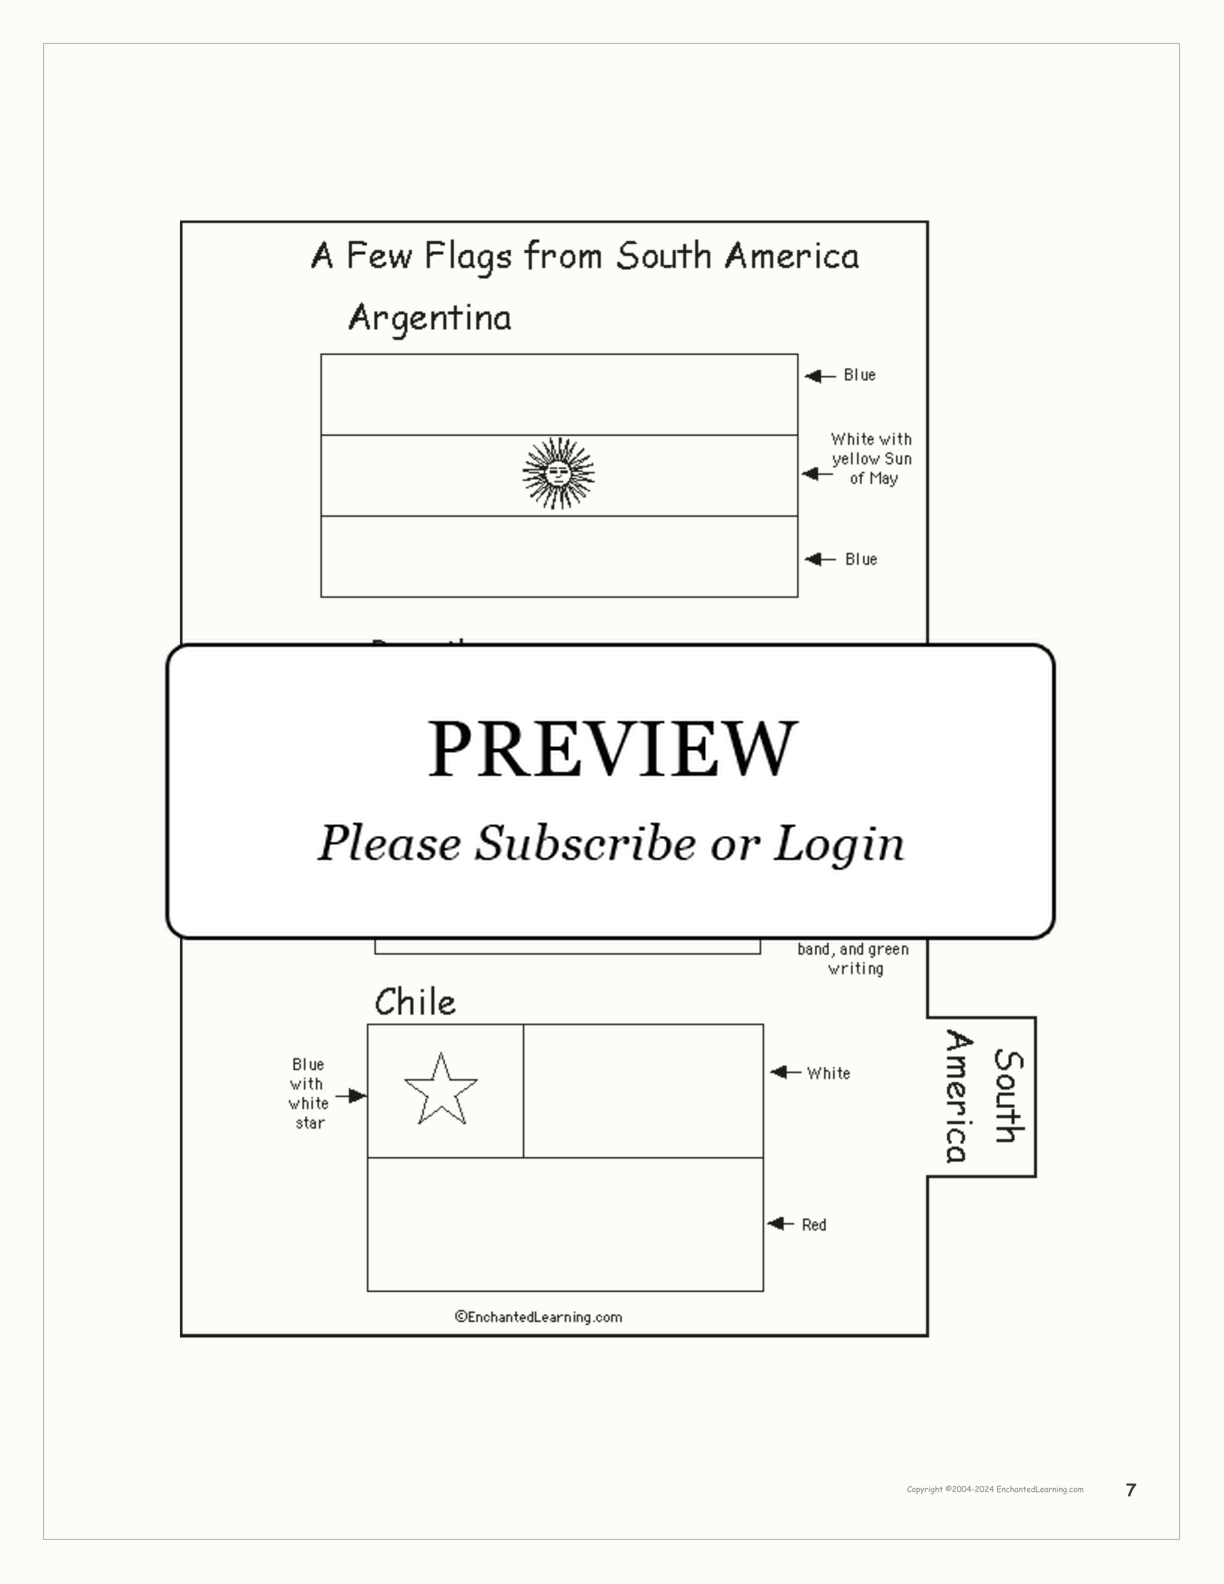 World Flags Book interactive printout page 7